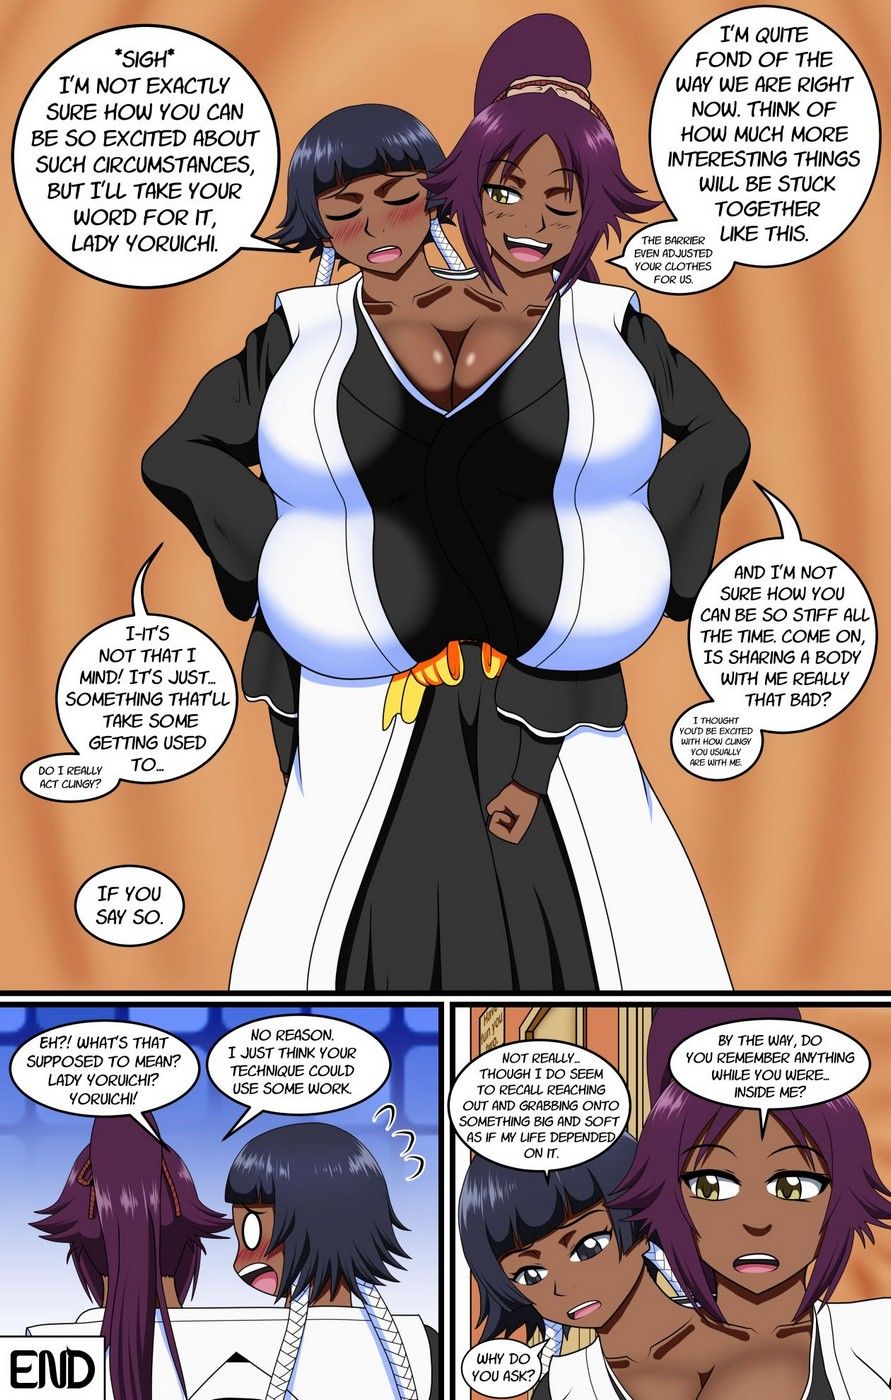 The Lusty Lamp - The Hotel Part 4 Stuck Together With You [Oxdaman] page 25